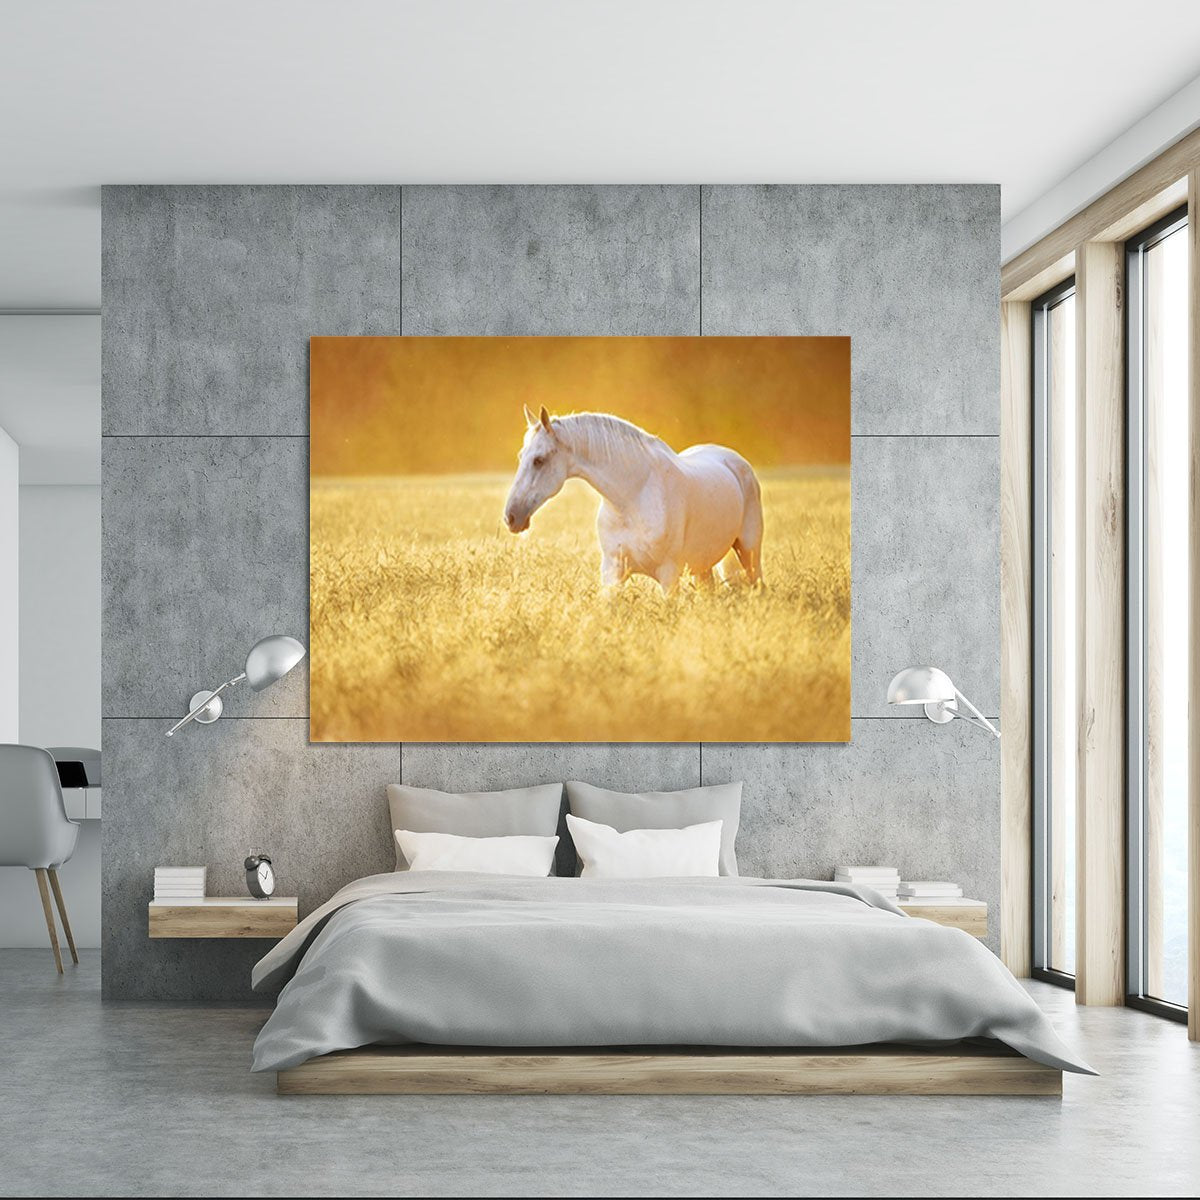 White Orlov trotter horse in rye Canvas Print or Poster